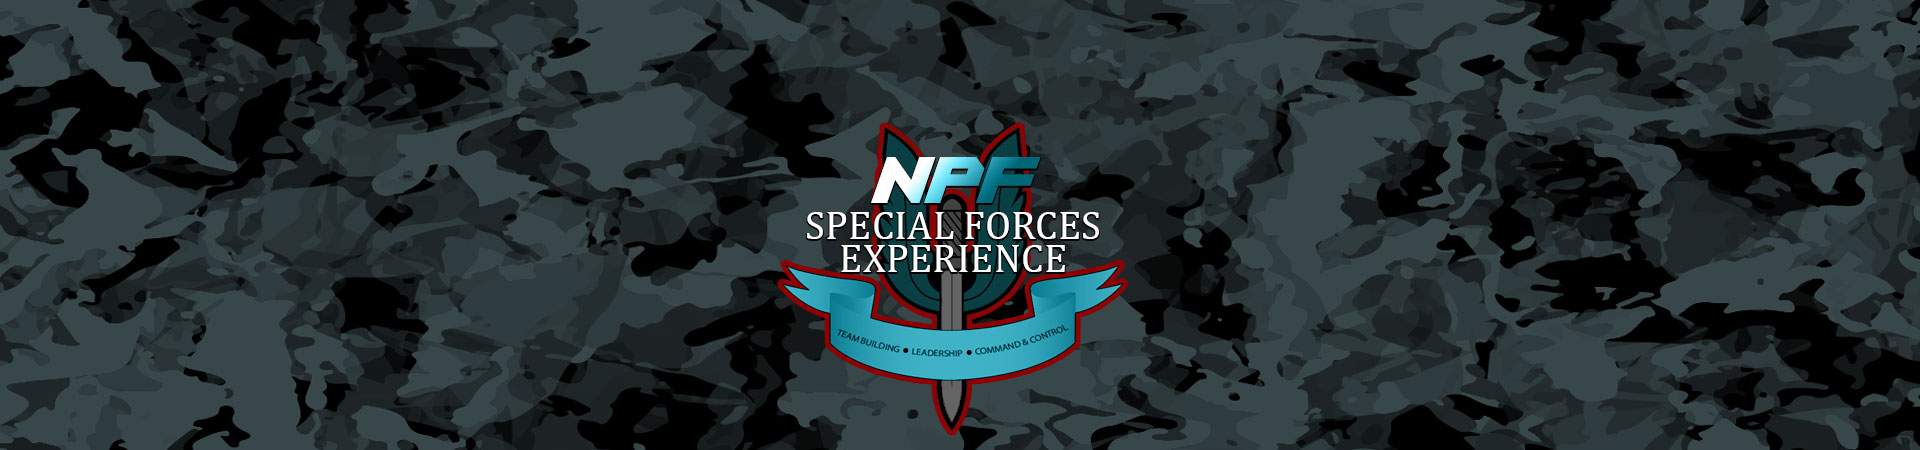 special forces experience